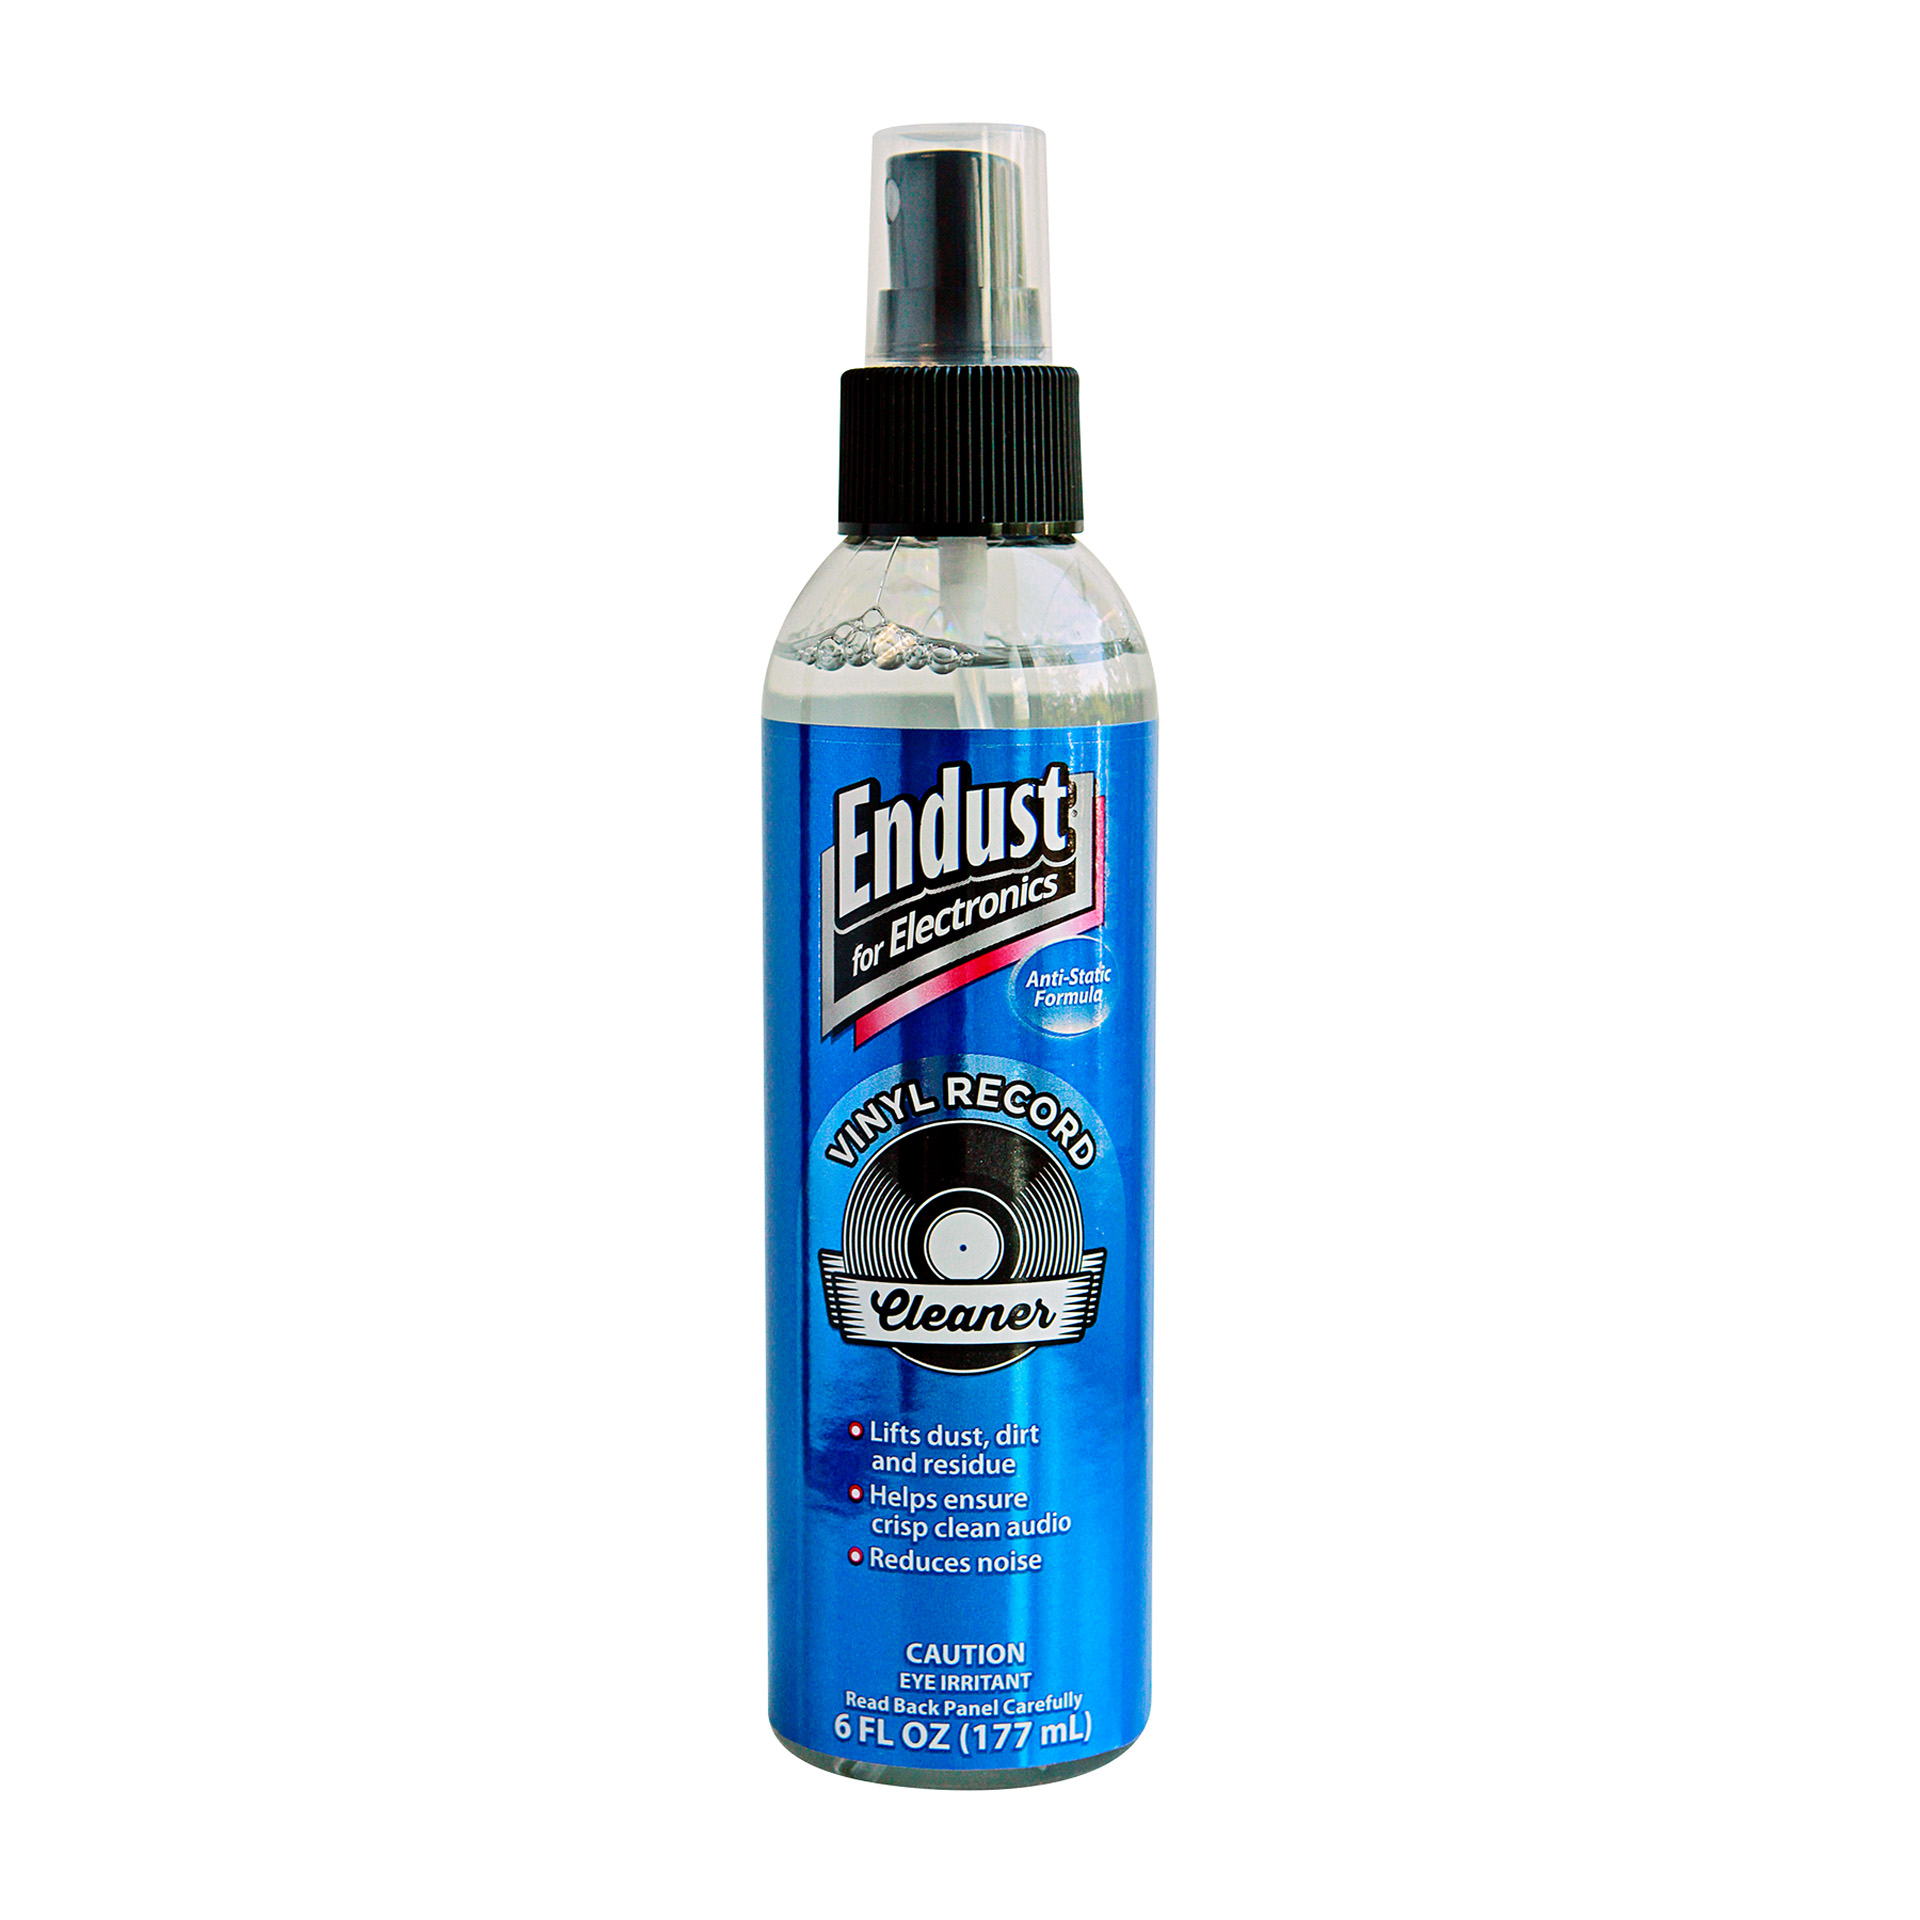 Endust For Electronics® Vinyl Record Cleaner, Part# 16495